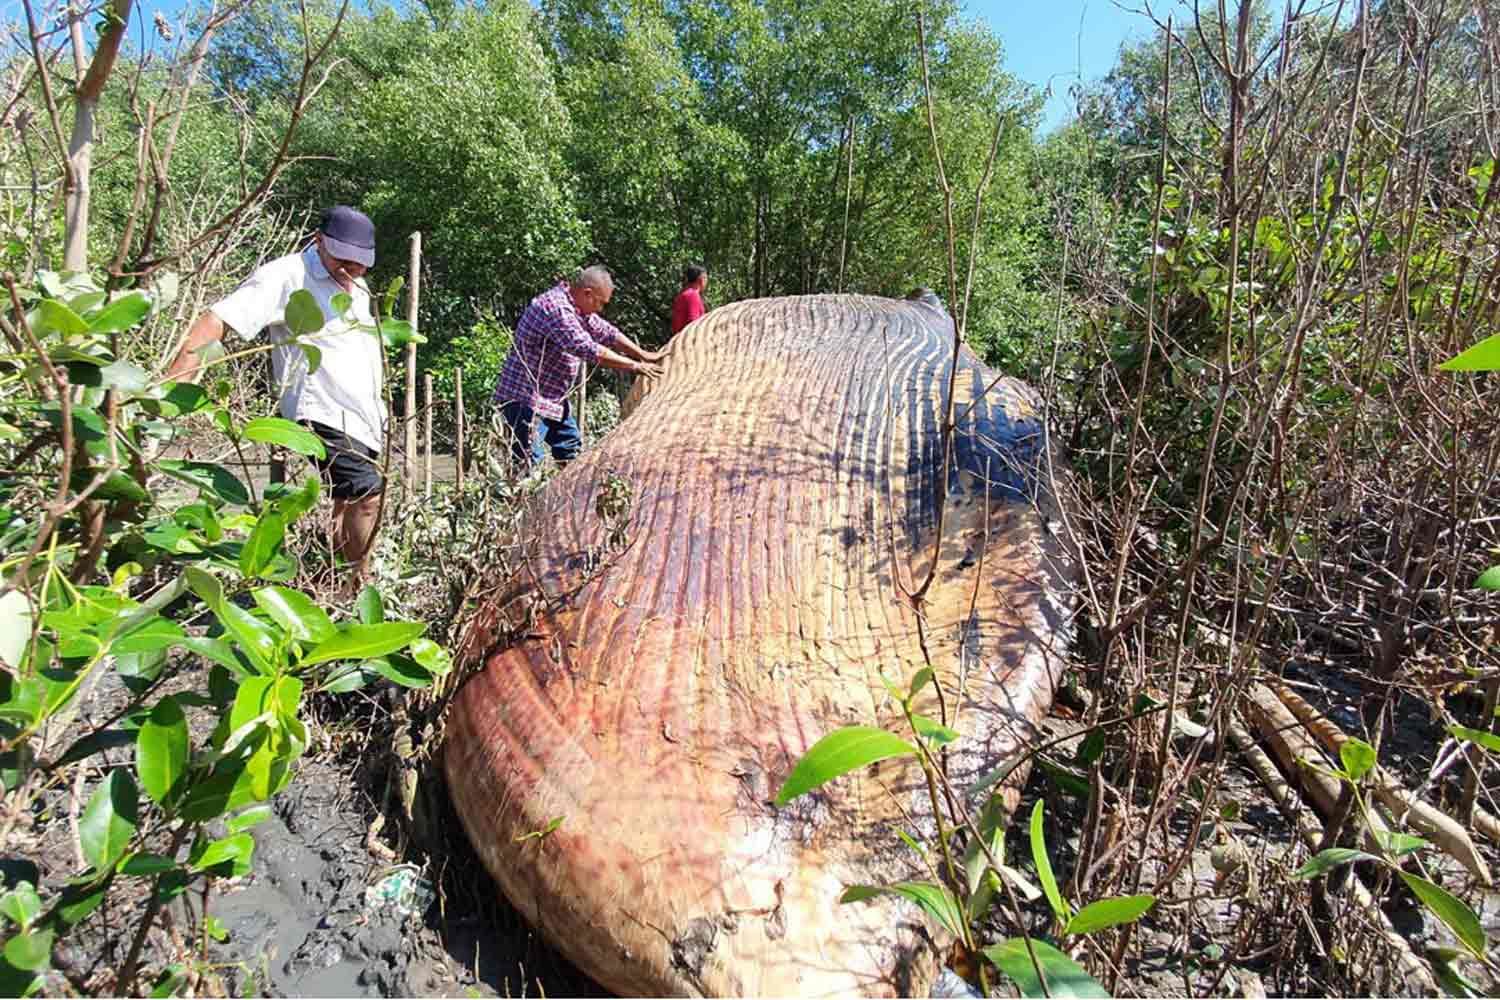 Officials from a marine and coastal resources research centre examine the dead Bruda whale washed ashore in the mangrove forest at Bang Poo, Samut Prakan.